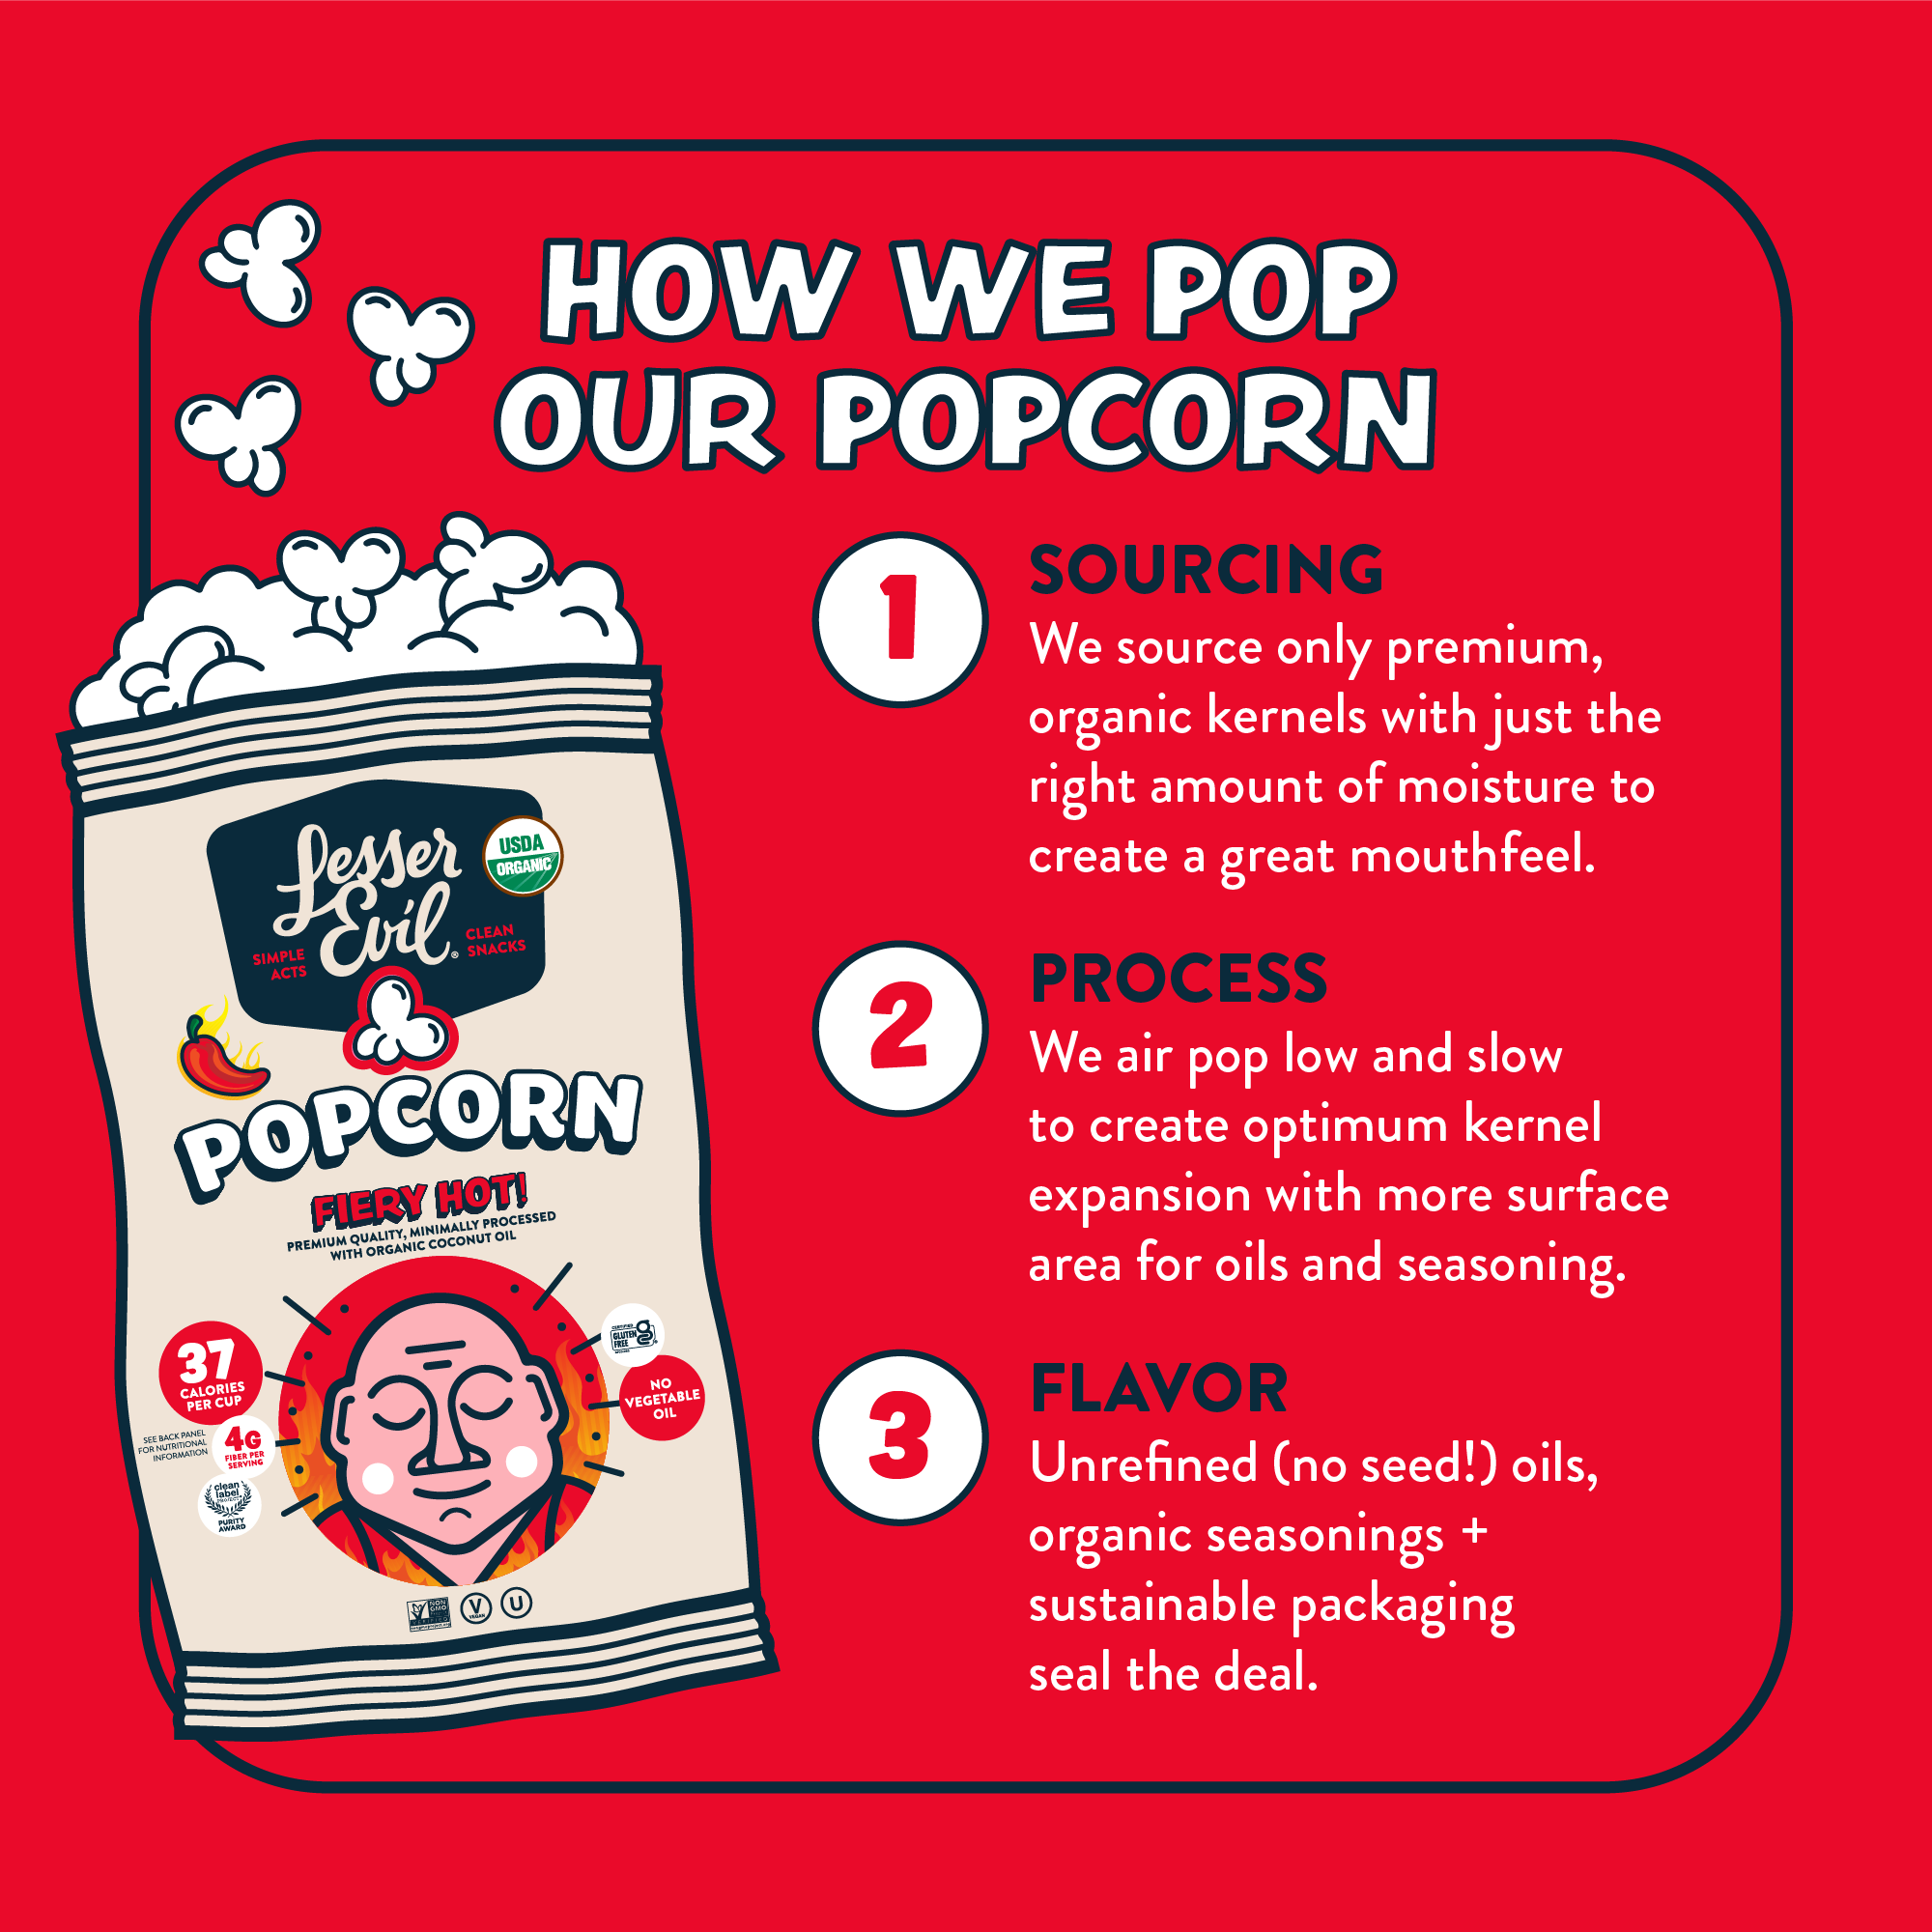 information about how we pop our fiery hot organic popcorn